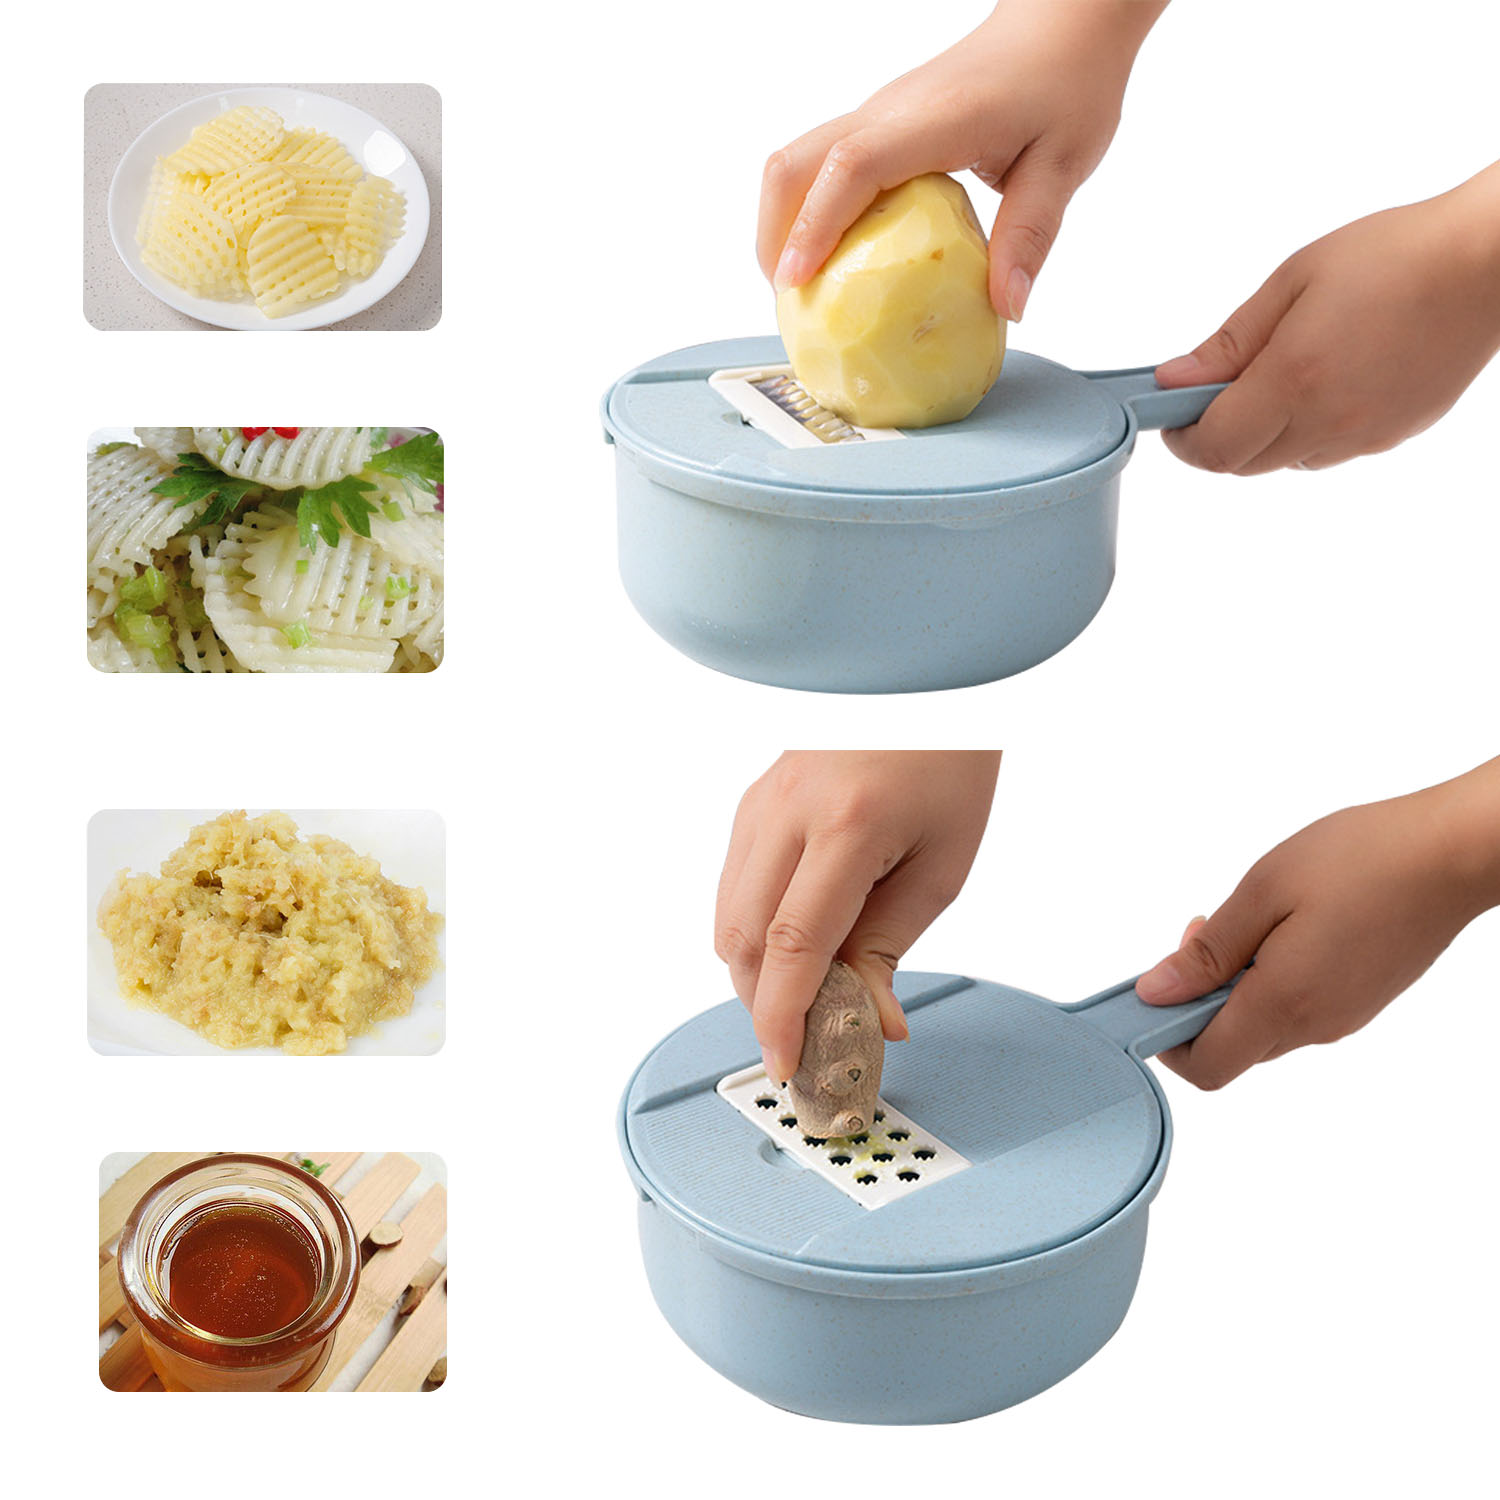 12 Pieces Sets Multi-Function Vegetable Slicer,Onion Mincer Chopper, Vegetable Chopper, Egg Slicer with Container Fruit Kitchen Grater